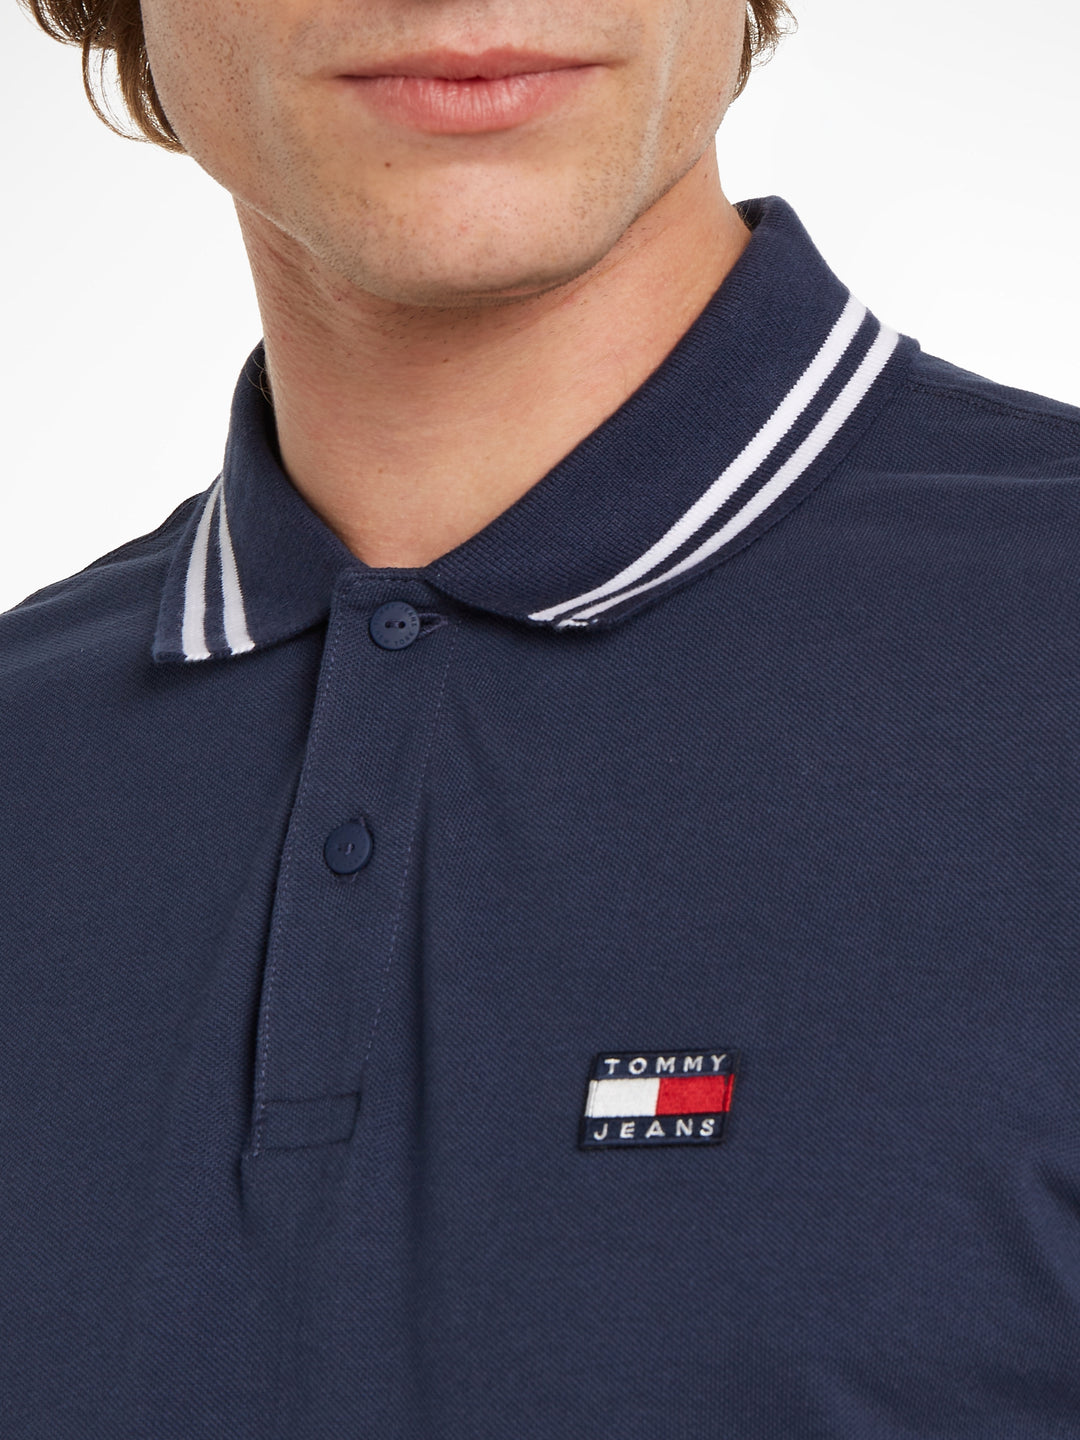 TJ CLASSIC TIPPING DETAIL POLO - NAVY